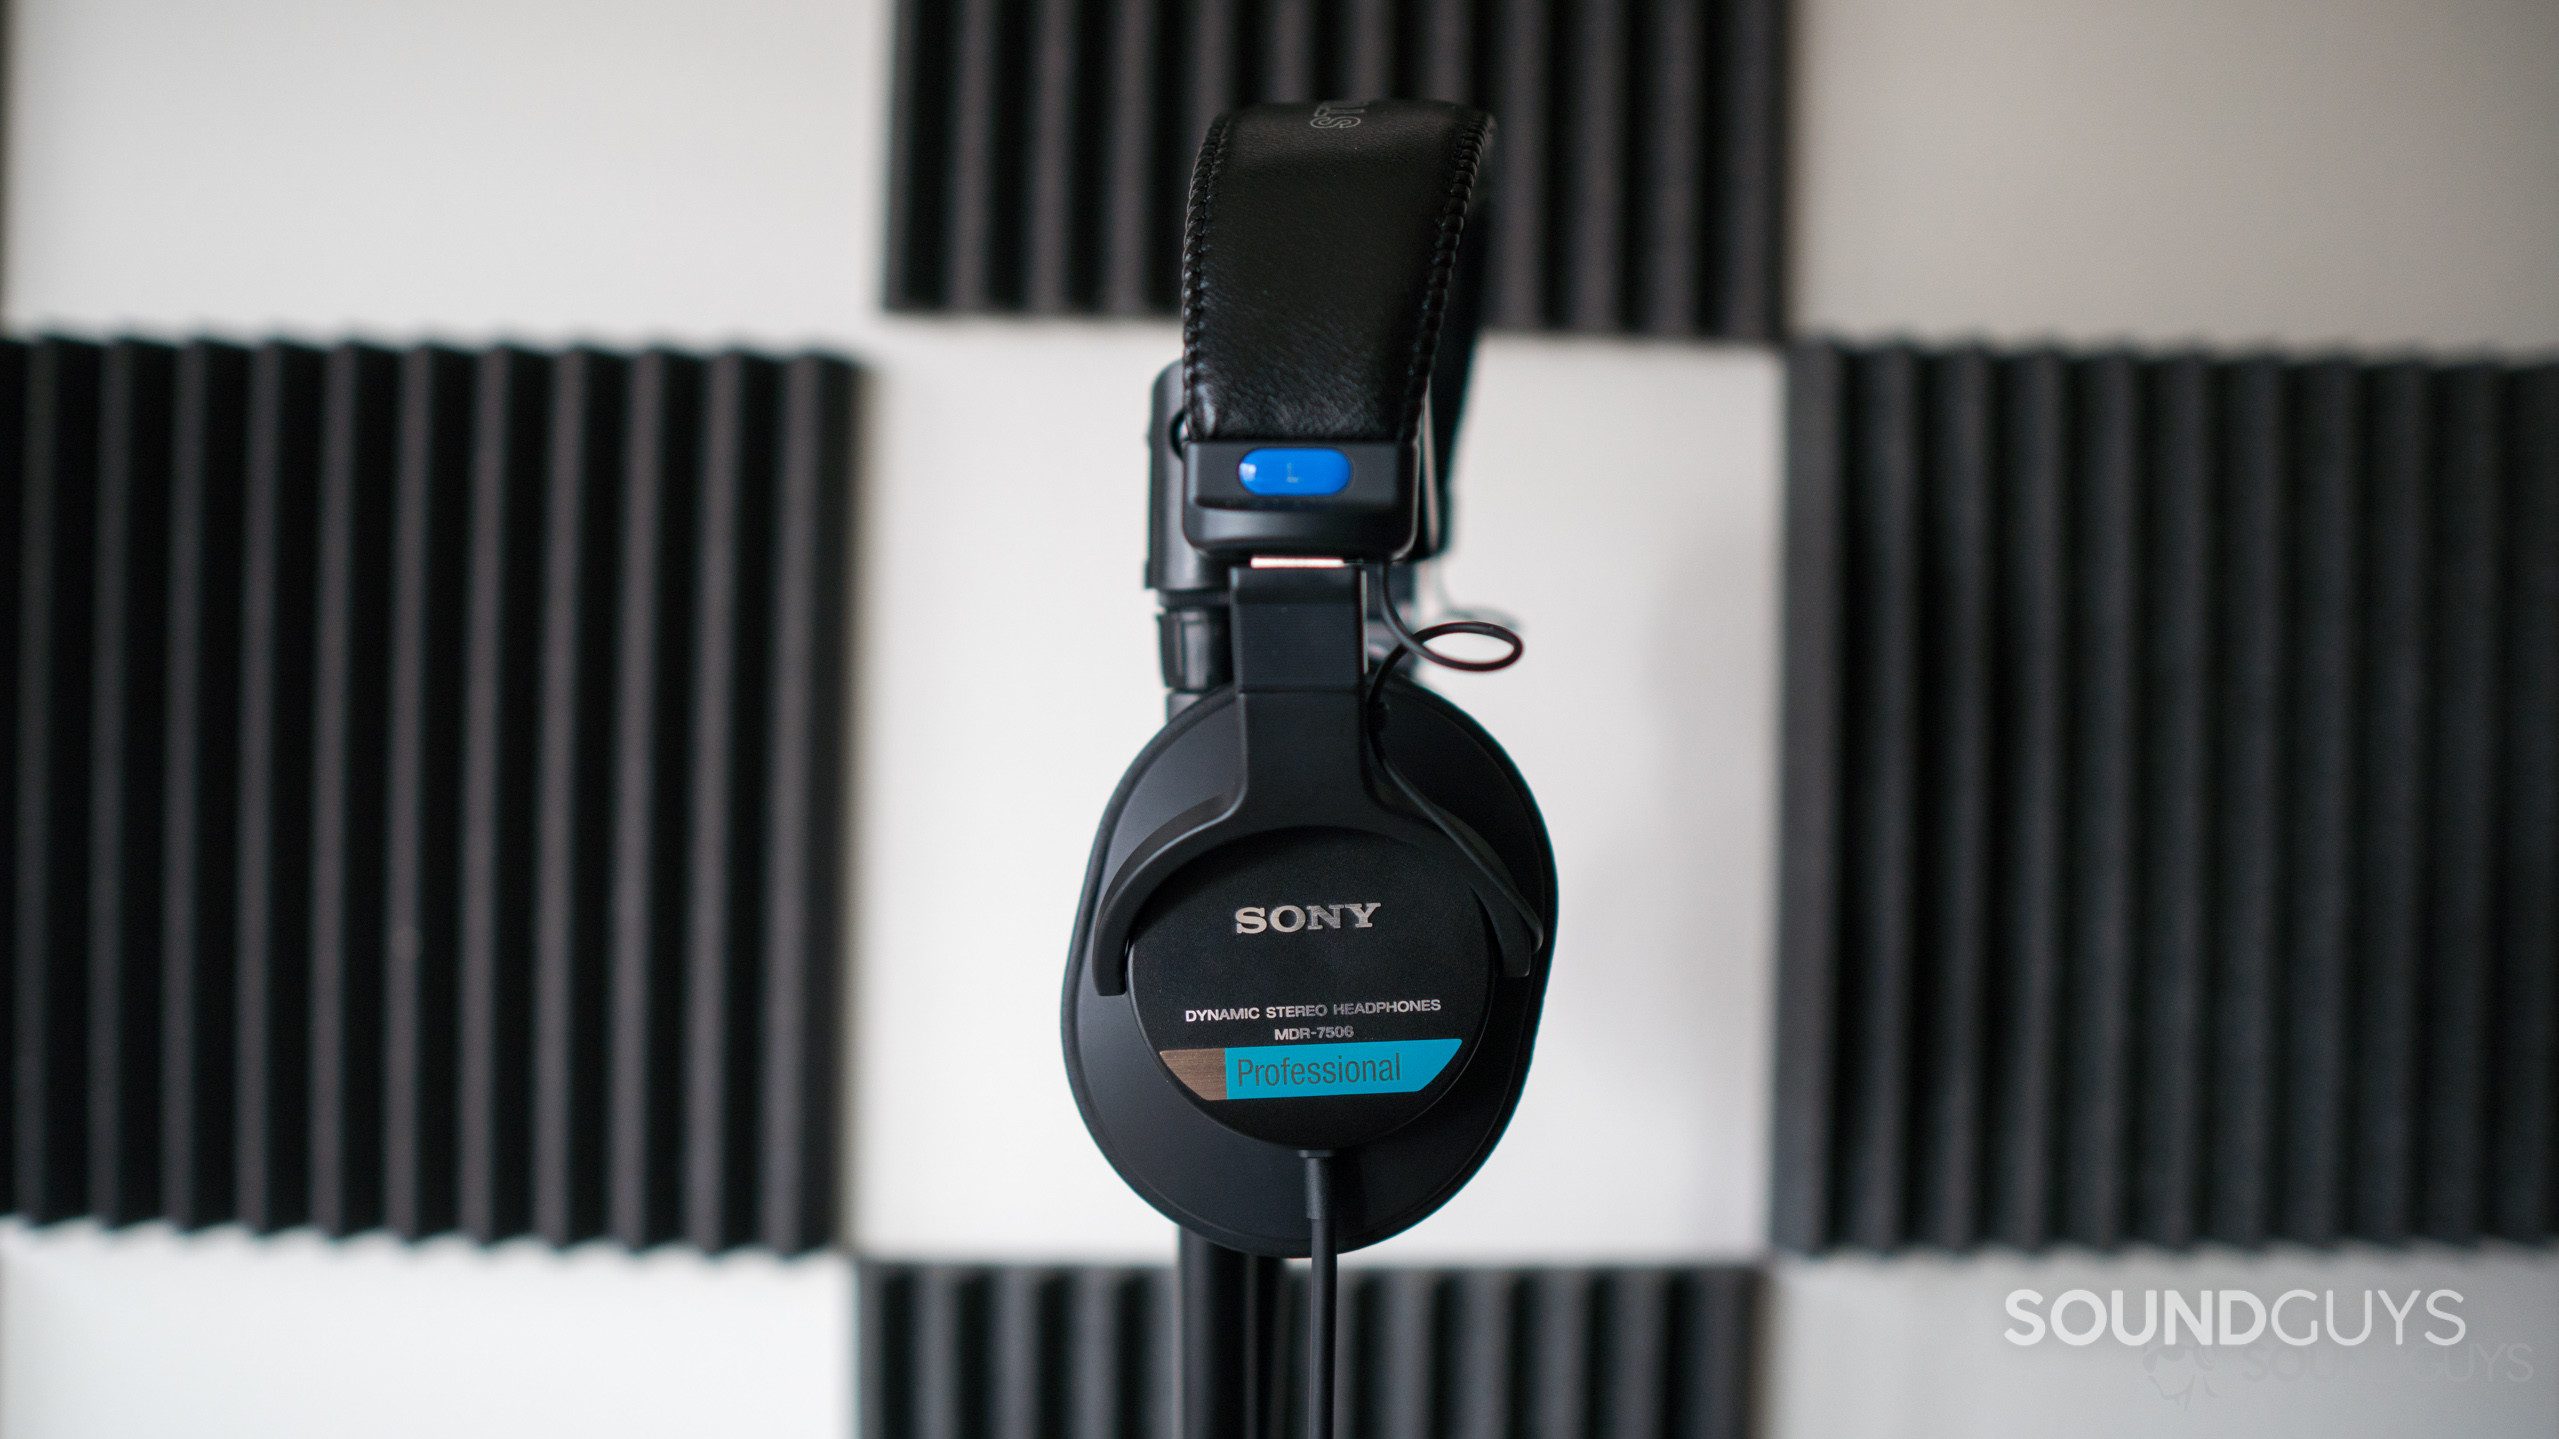 The Sony MDR 7506 resting on a microphone stand in a recording studio.